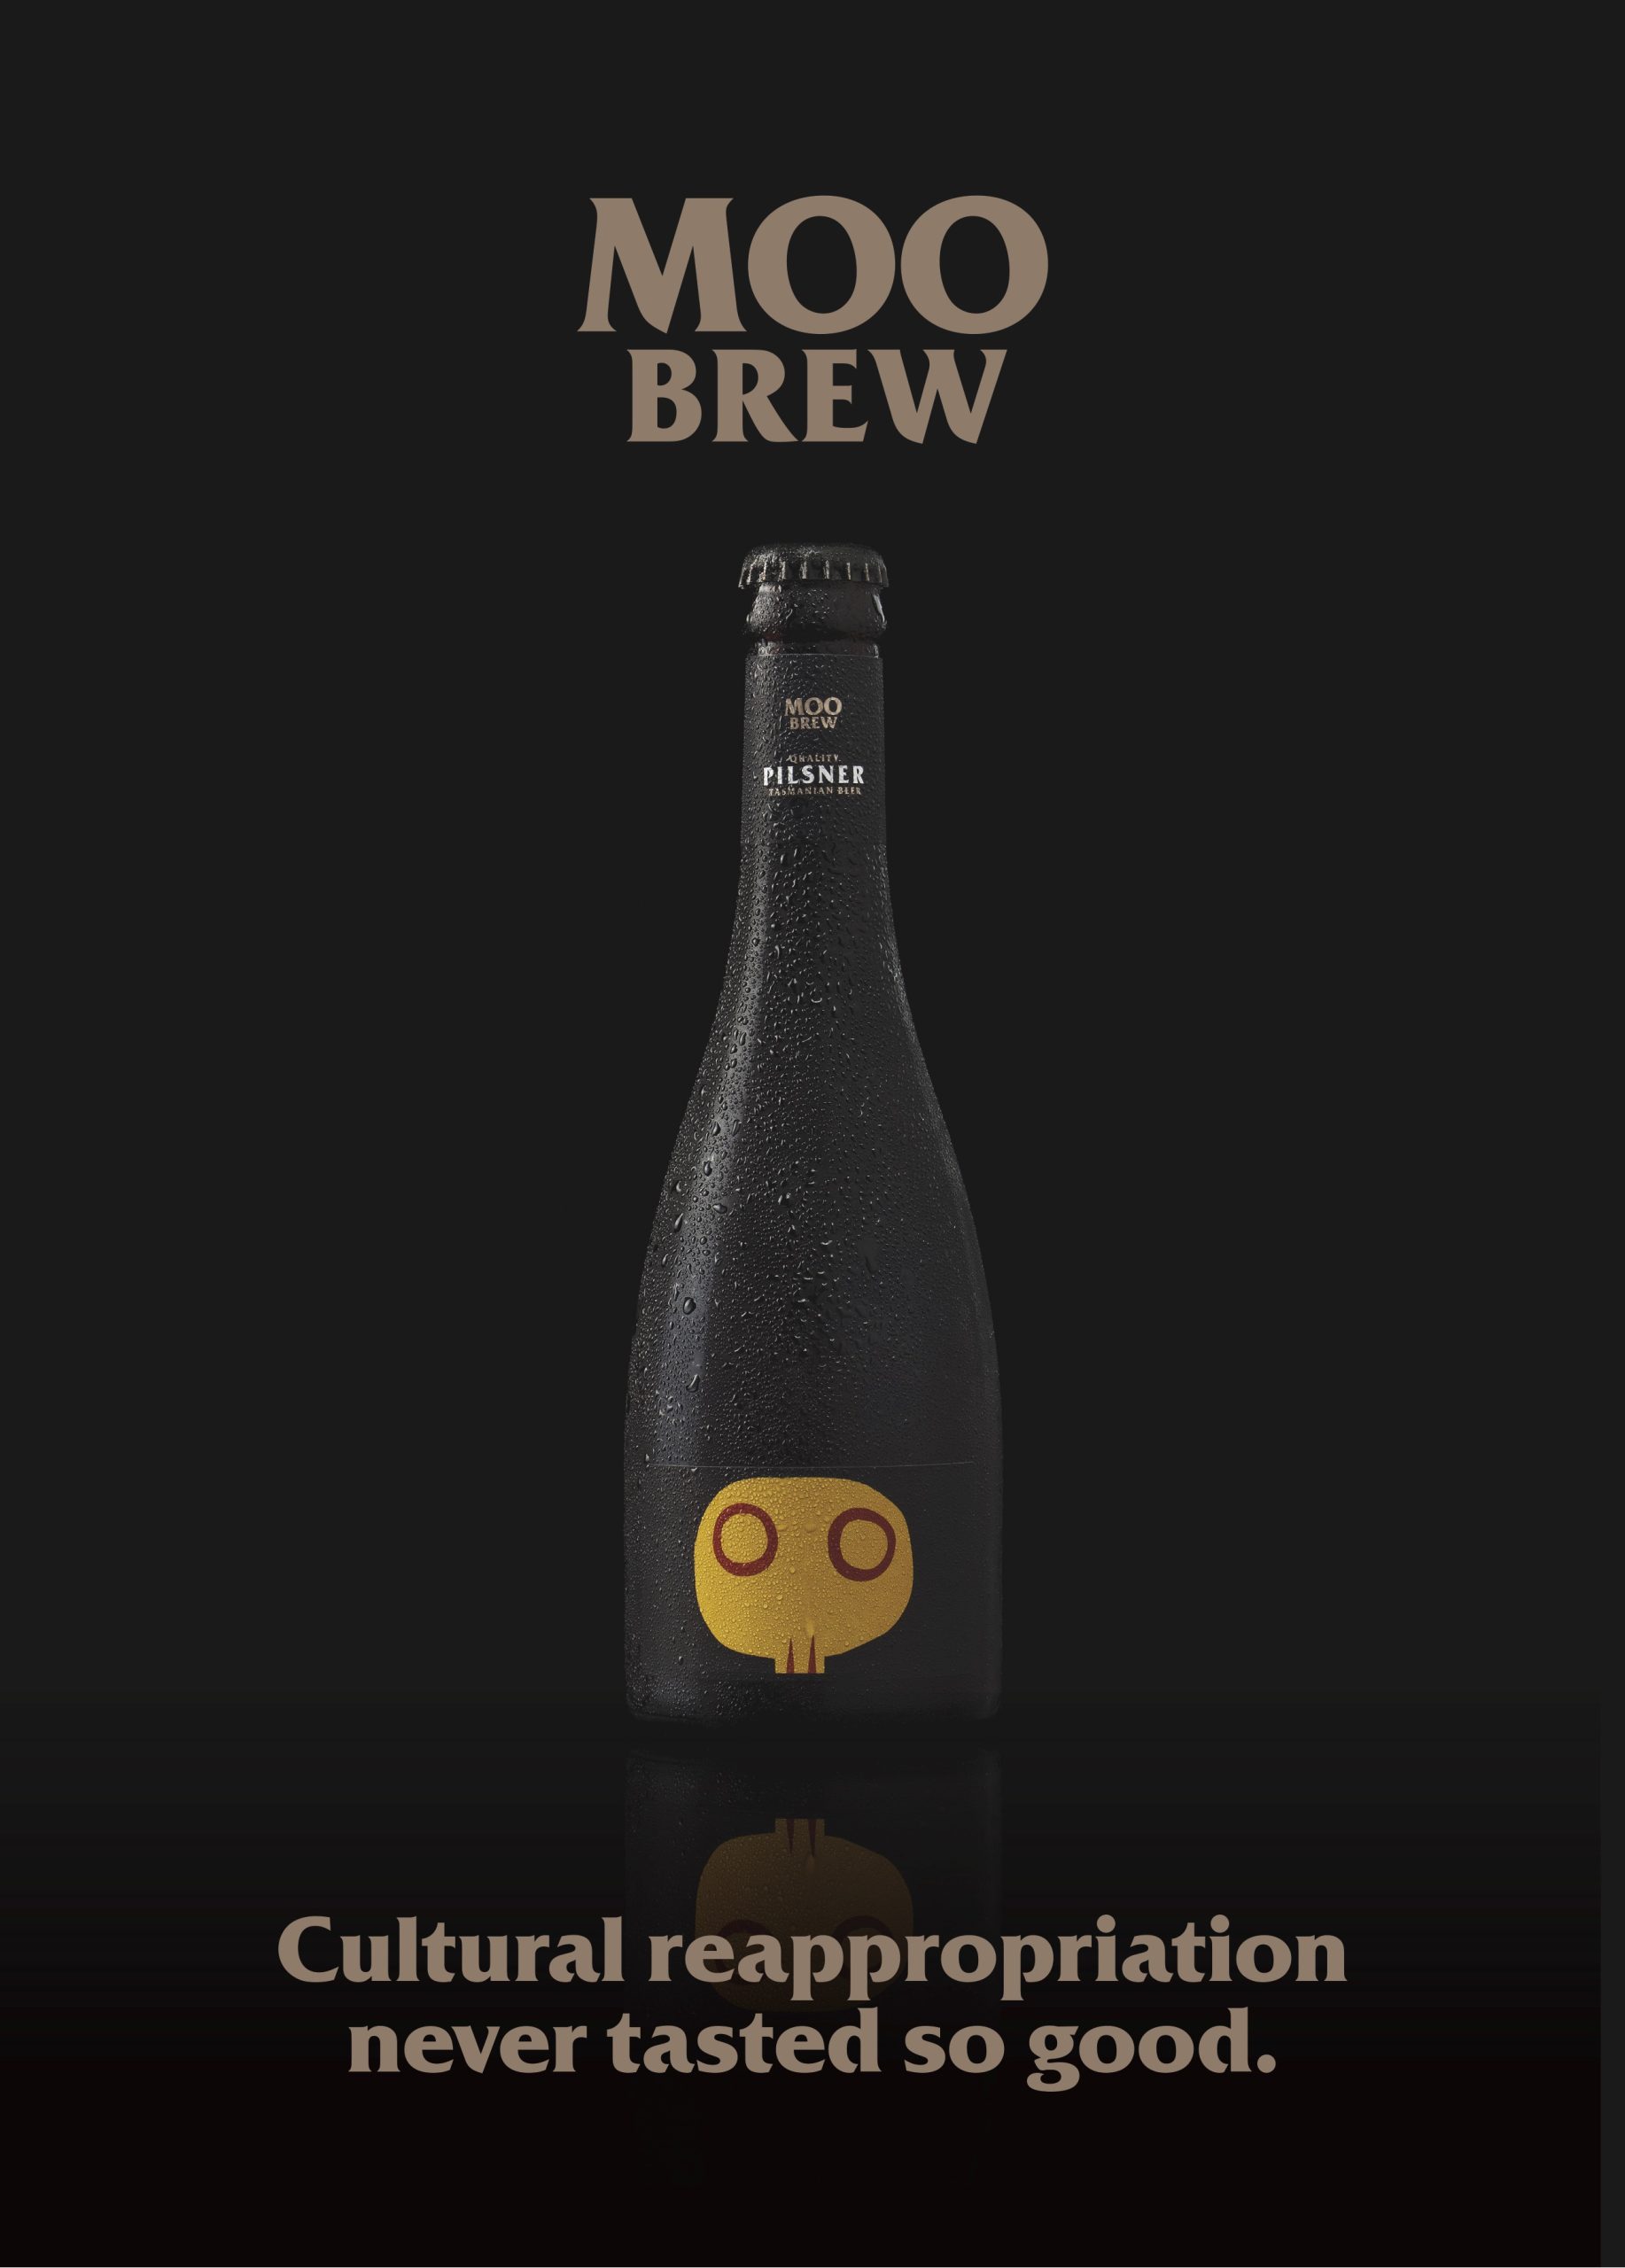 Moo Brew: Cultural reappropriation never tasted so good